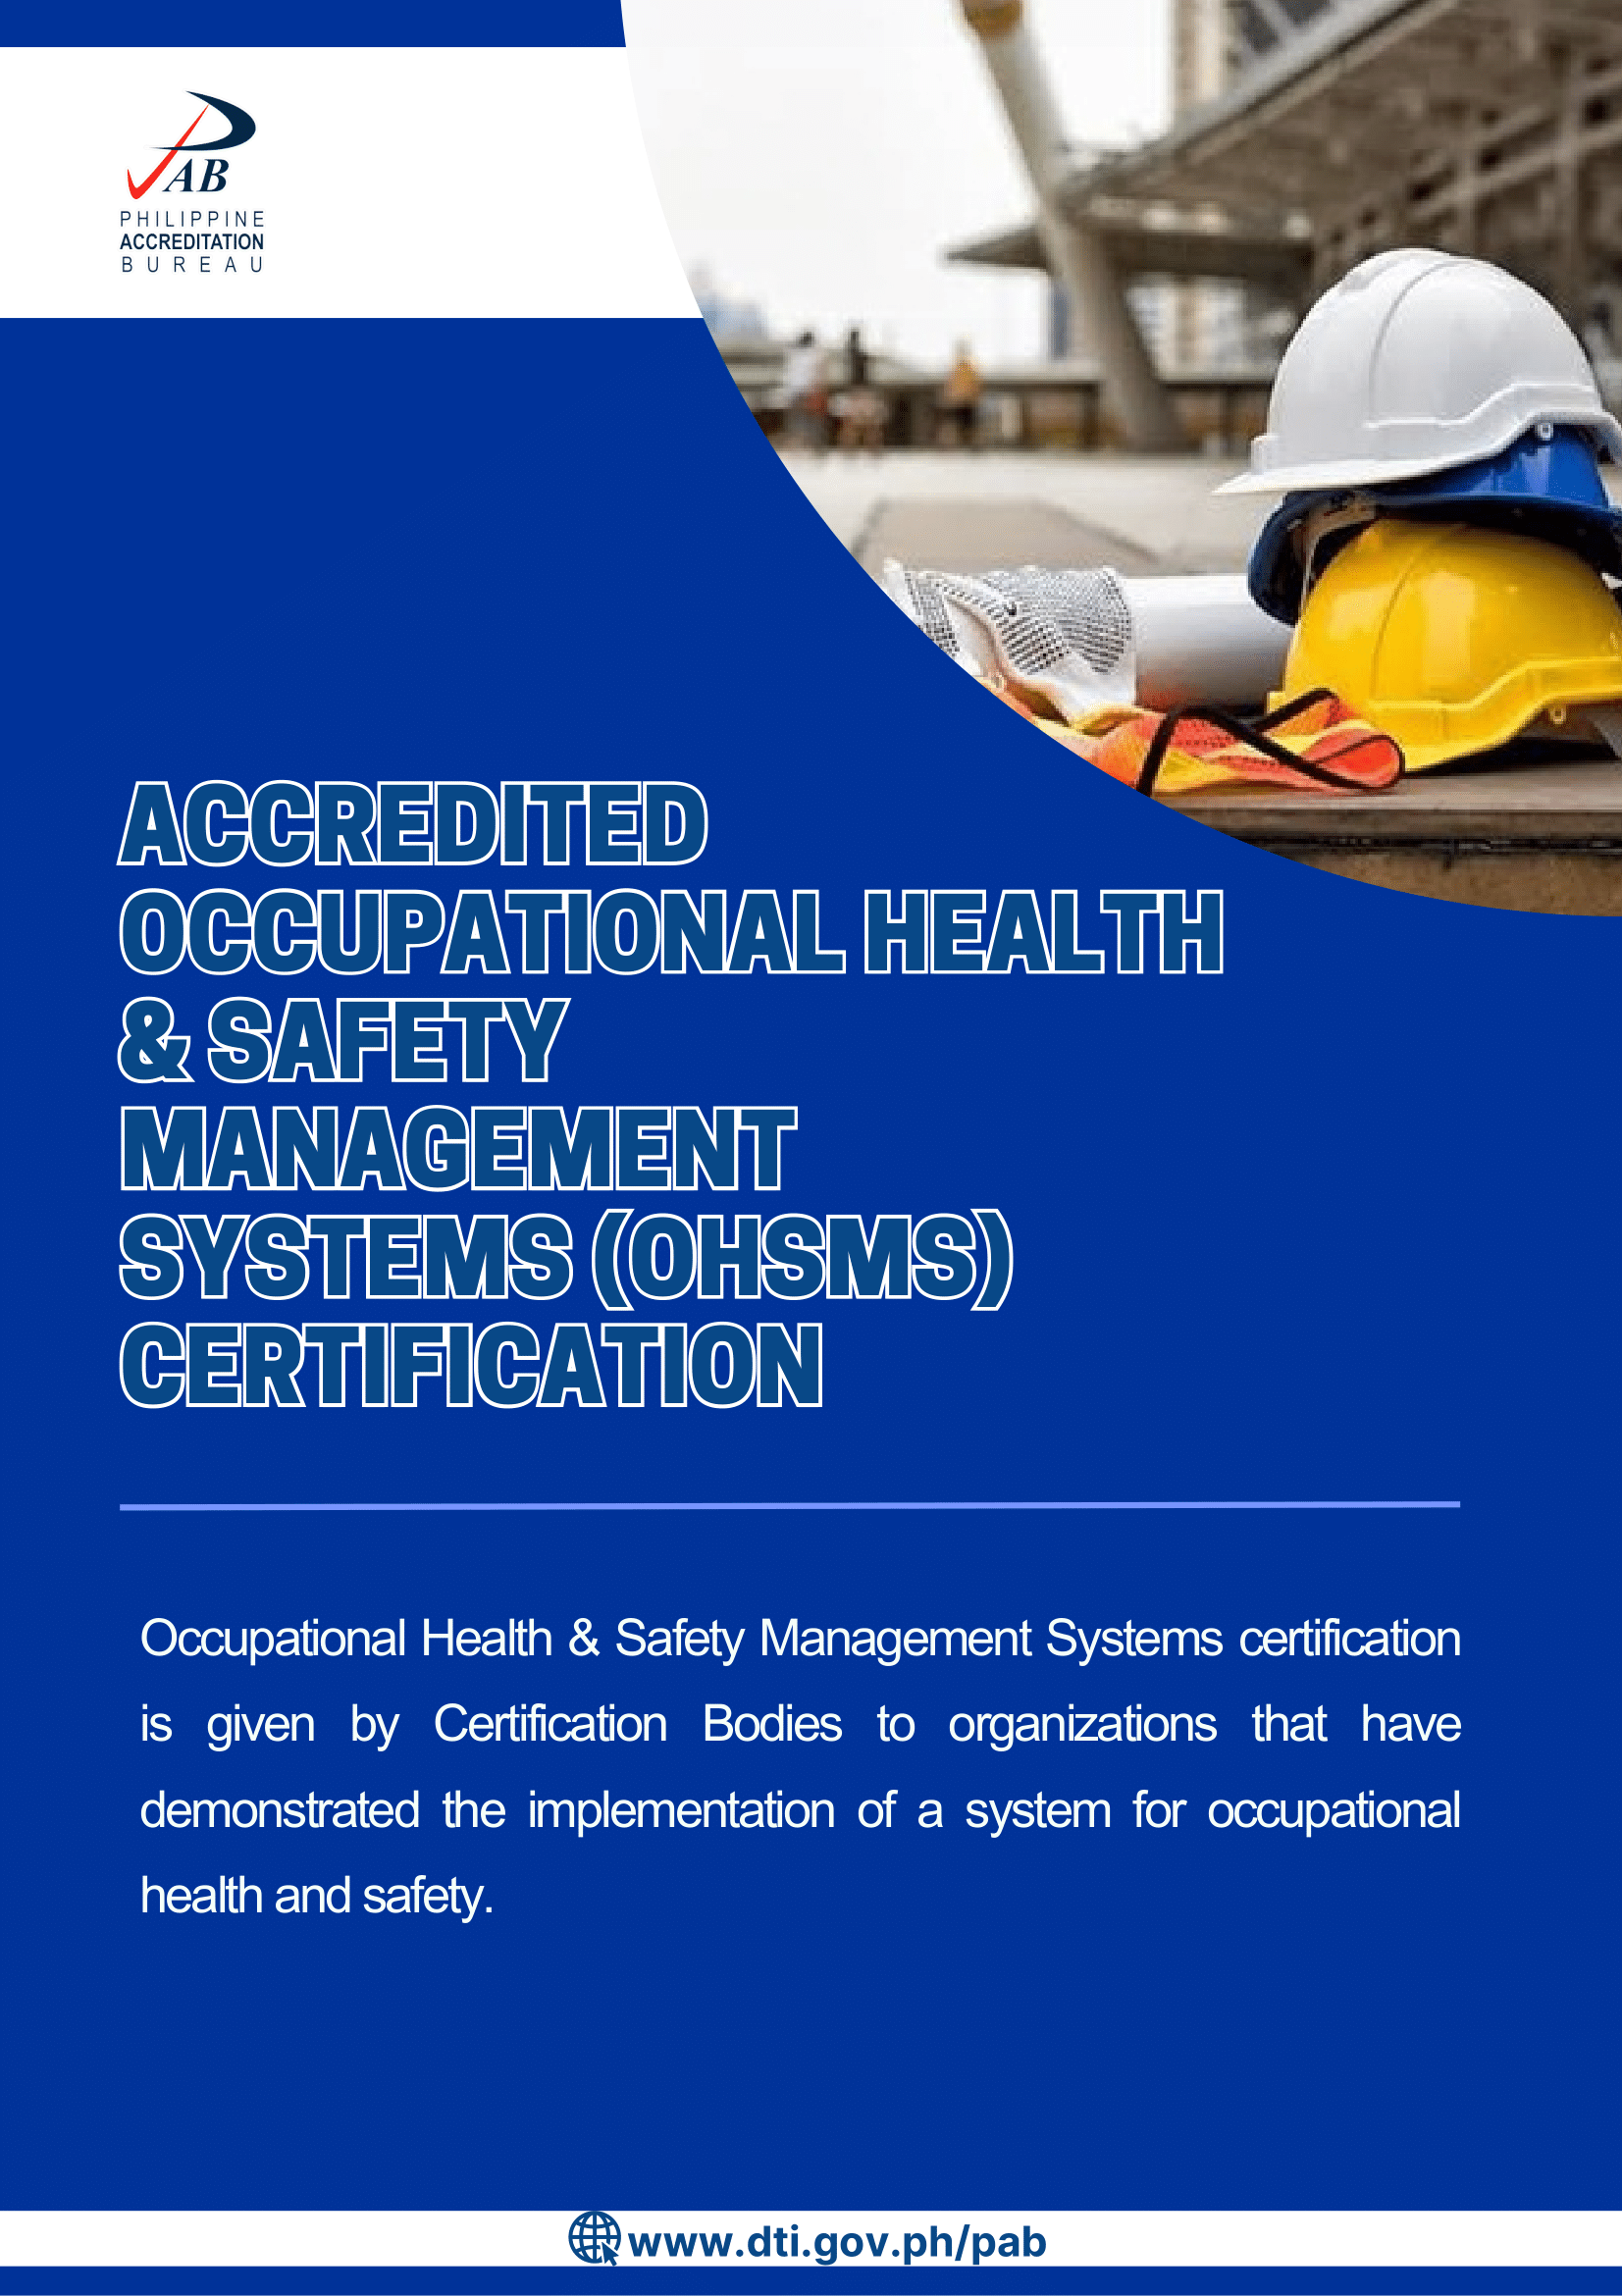 Accredited Occupational Health and Safety Management Systems (OHSMS) Certification